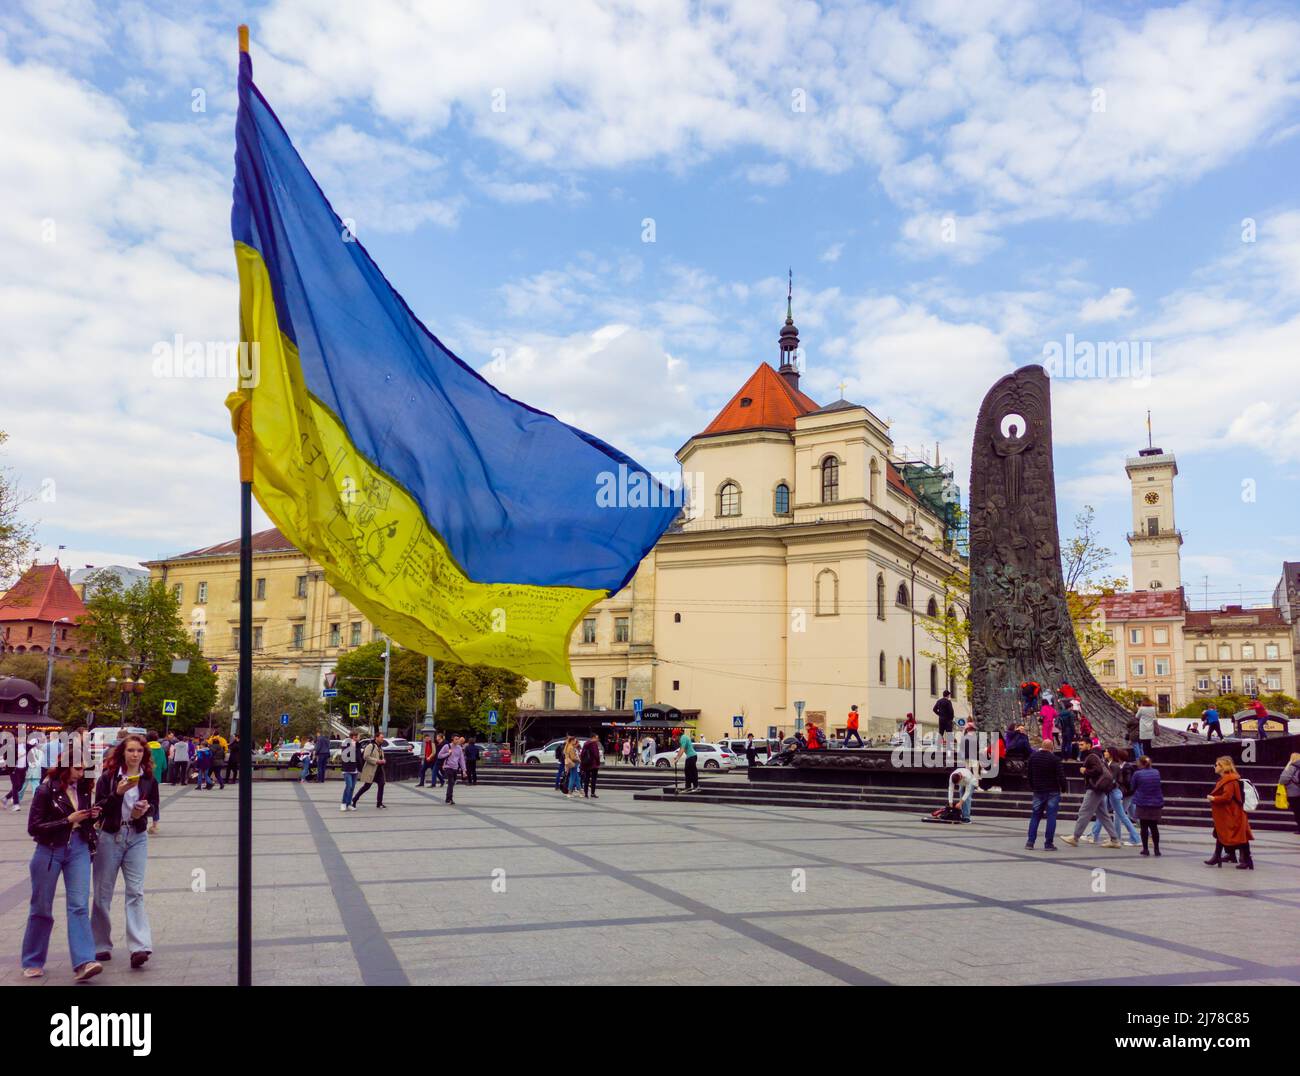 The war in Ukraine. Ukrainian flag against the background of the Lviv City Council and the monument to Taras Shevchenko Stock Photo